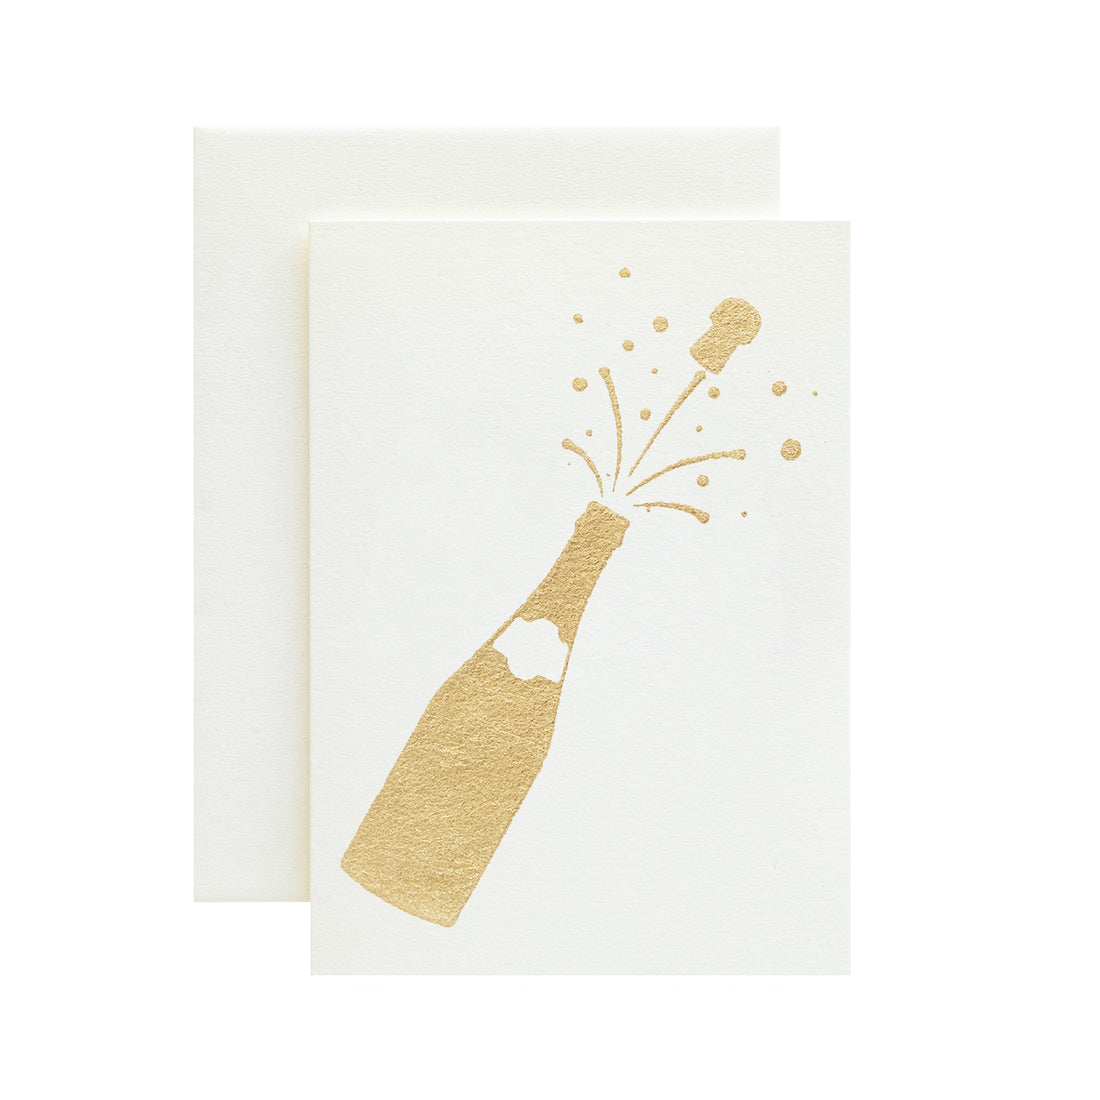 A white card with the silhouette of a champagne bottle with the cork popping in a spray of bubbles, in solid gold leaf.